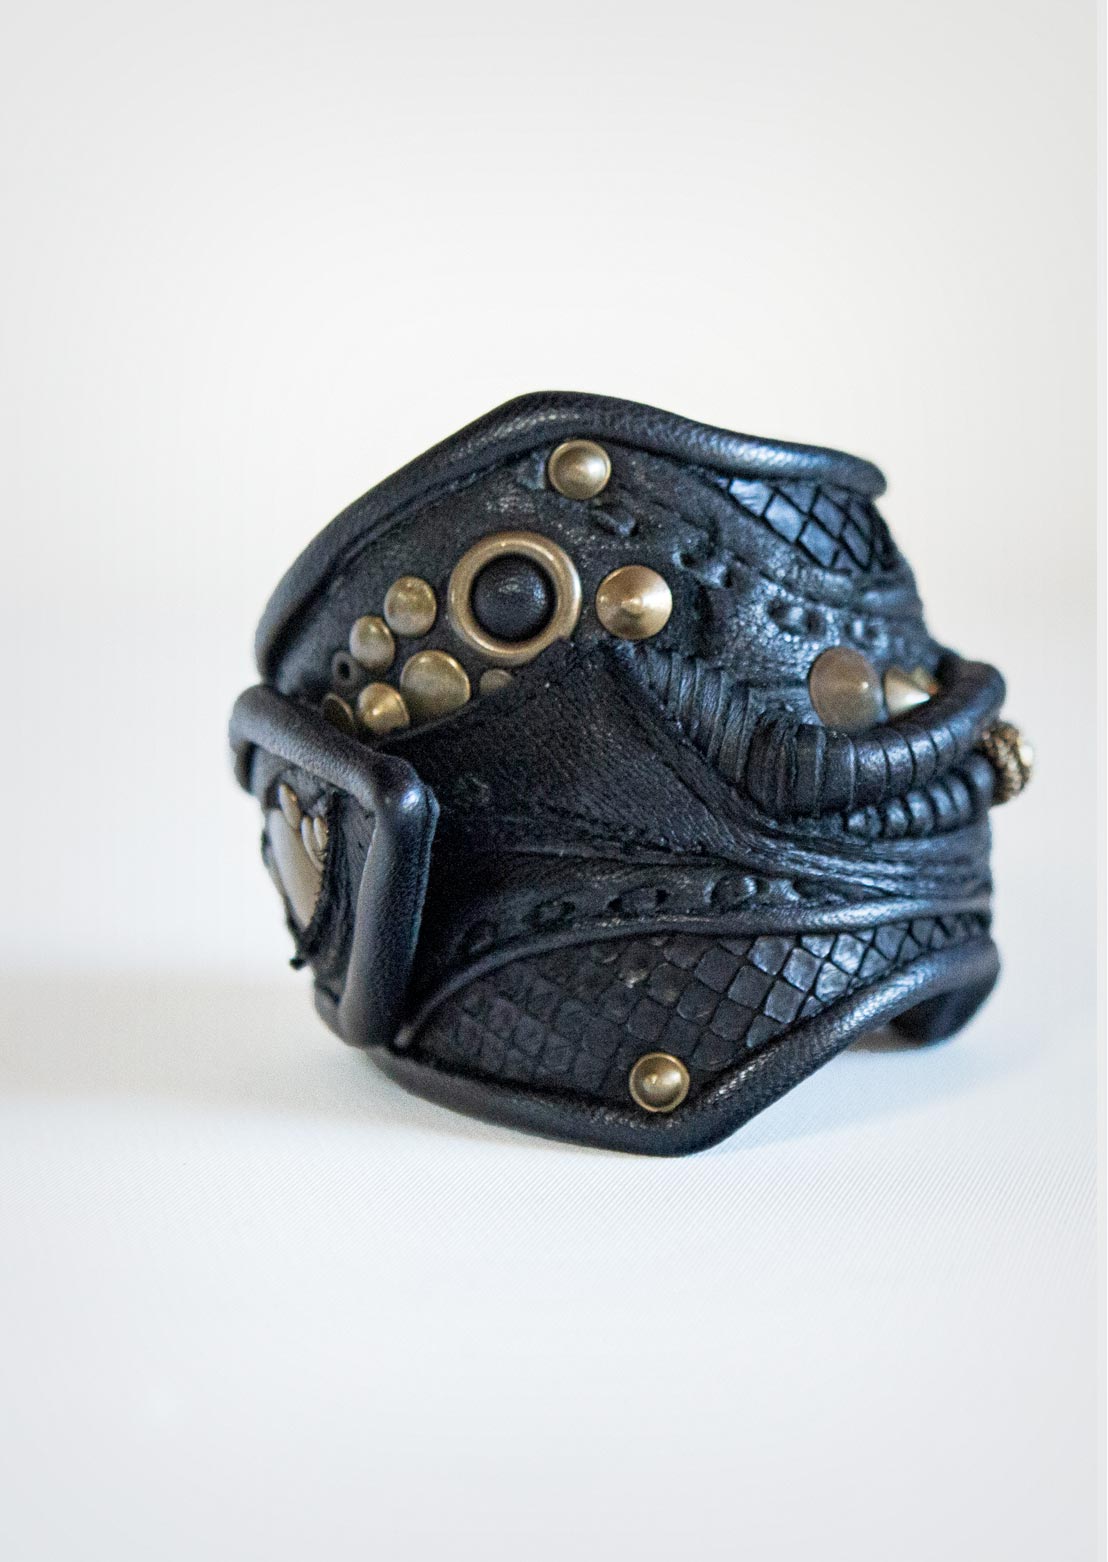 Load image into Gallery viewer, Hand made leather arm bands
